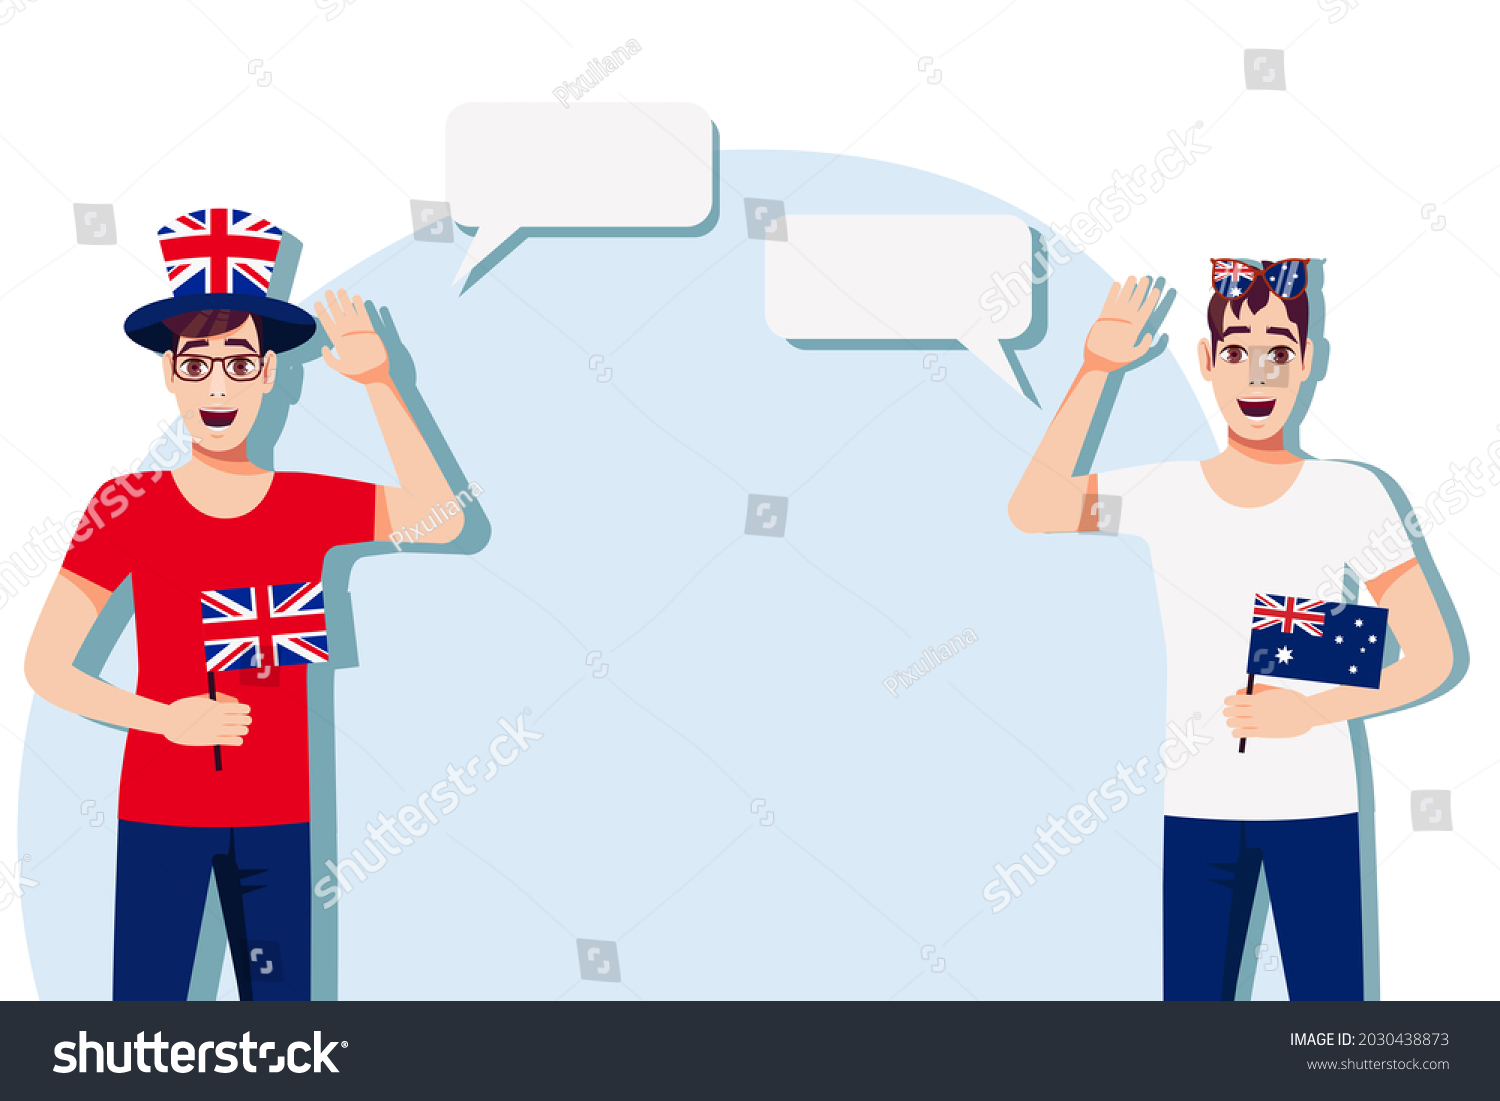 SVG of The concept of international communication, sports, education, business between the United Kingdom and Australia. Men with British and Australian flags. Vector illustration. svg